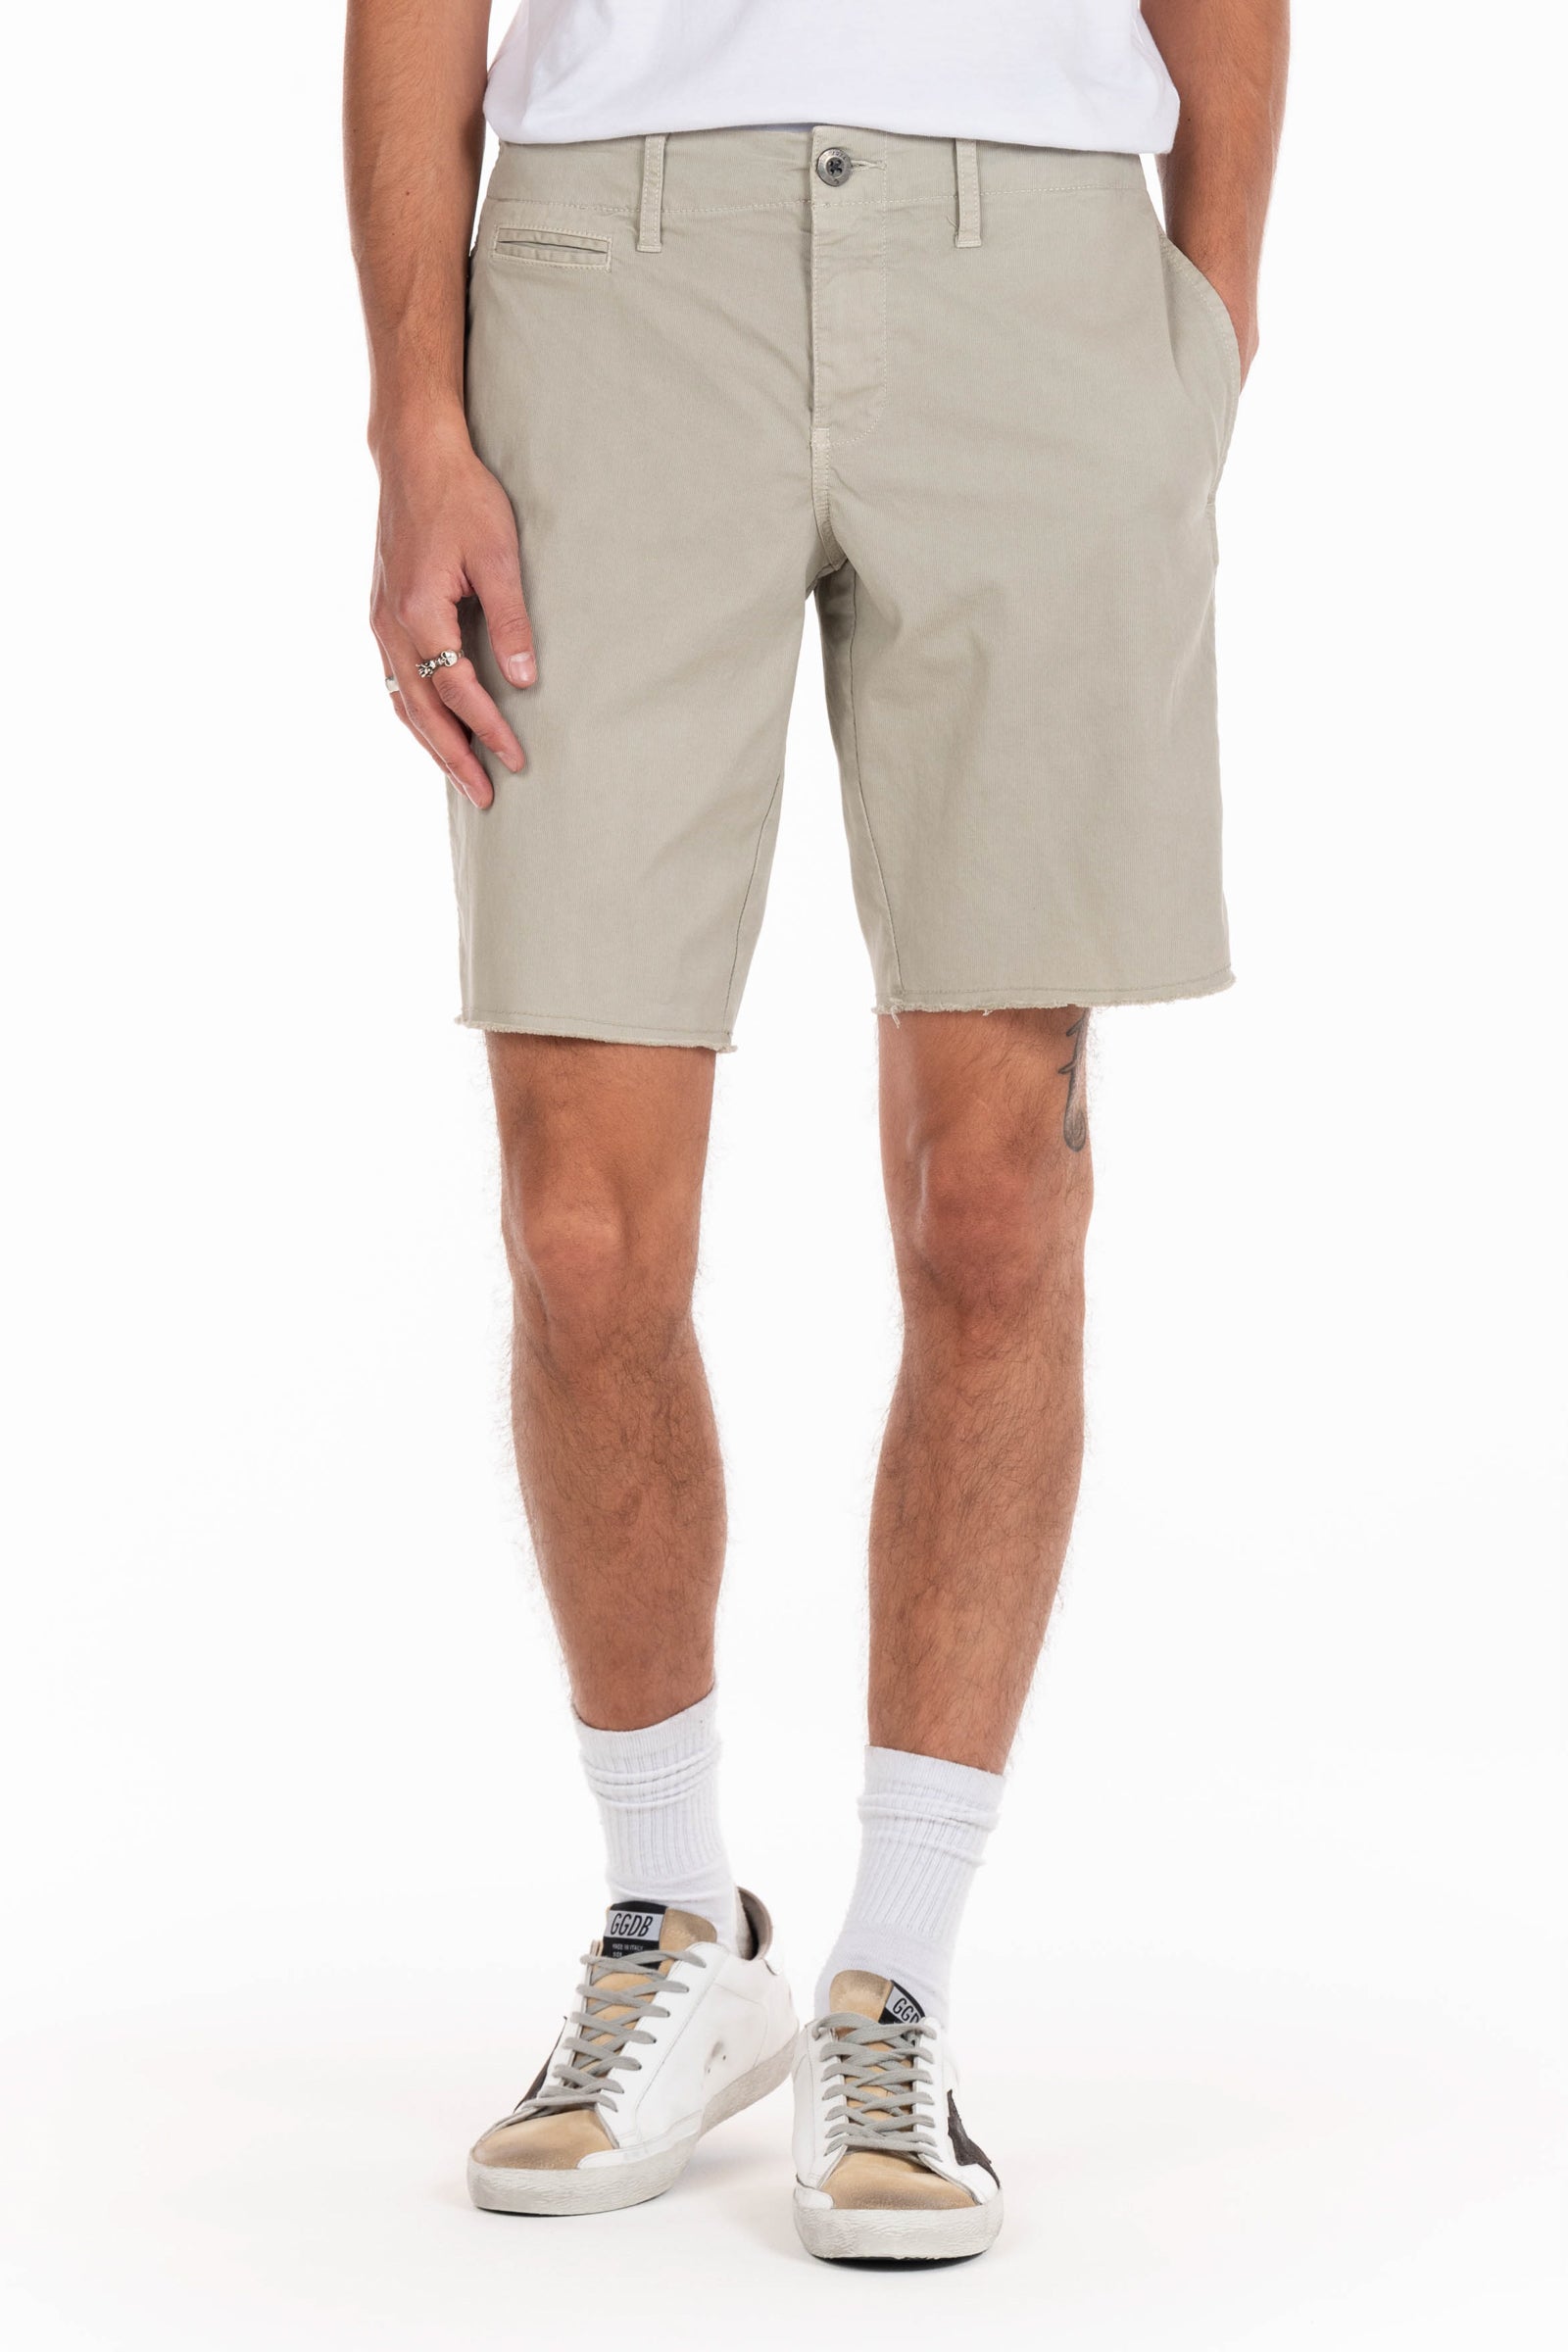 Original Paperbacks Rockland Chino Short in Bone on Model Cropped Styled View